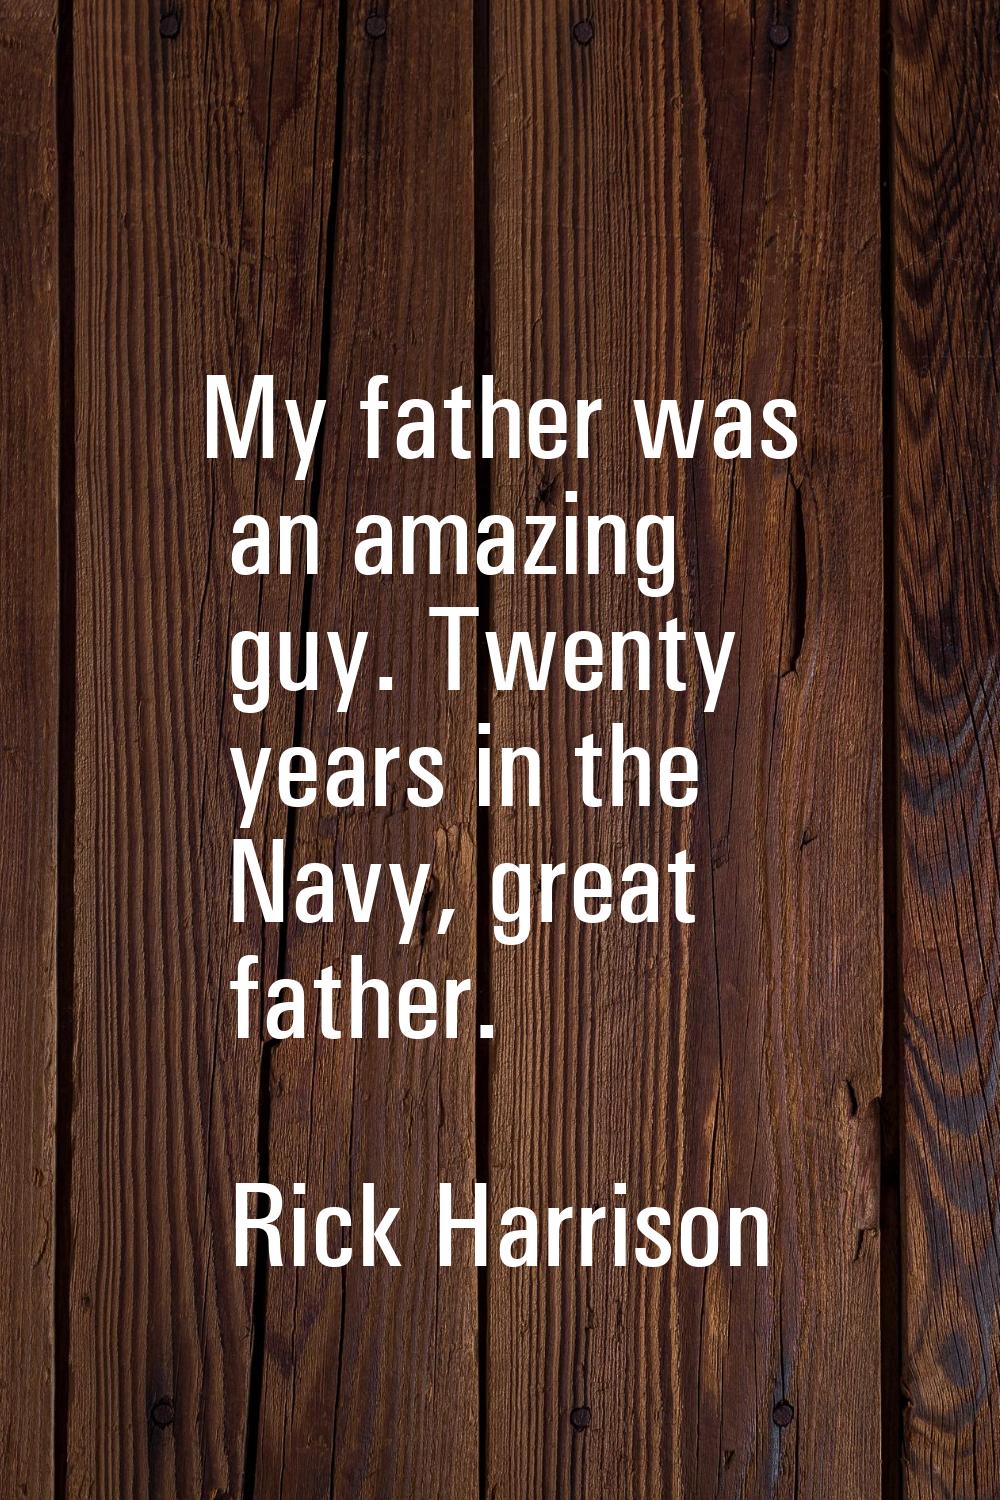 My father was an amazing guy. Twenty years in the Navy, great father.